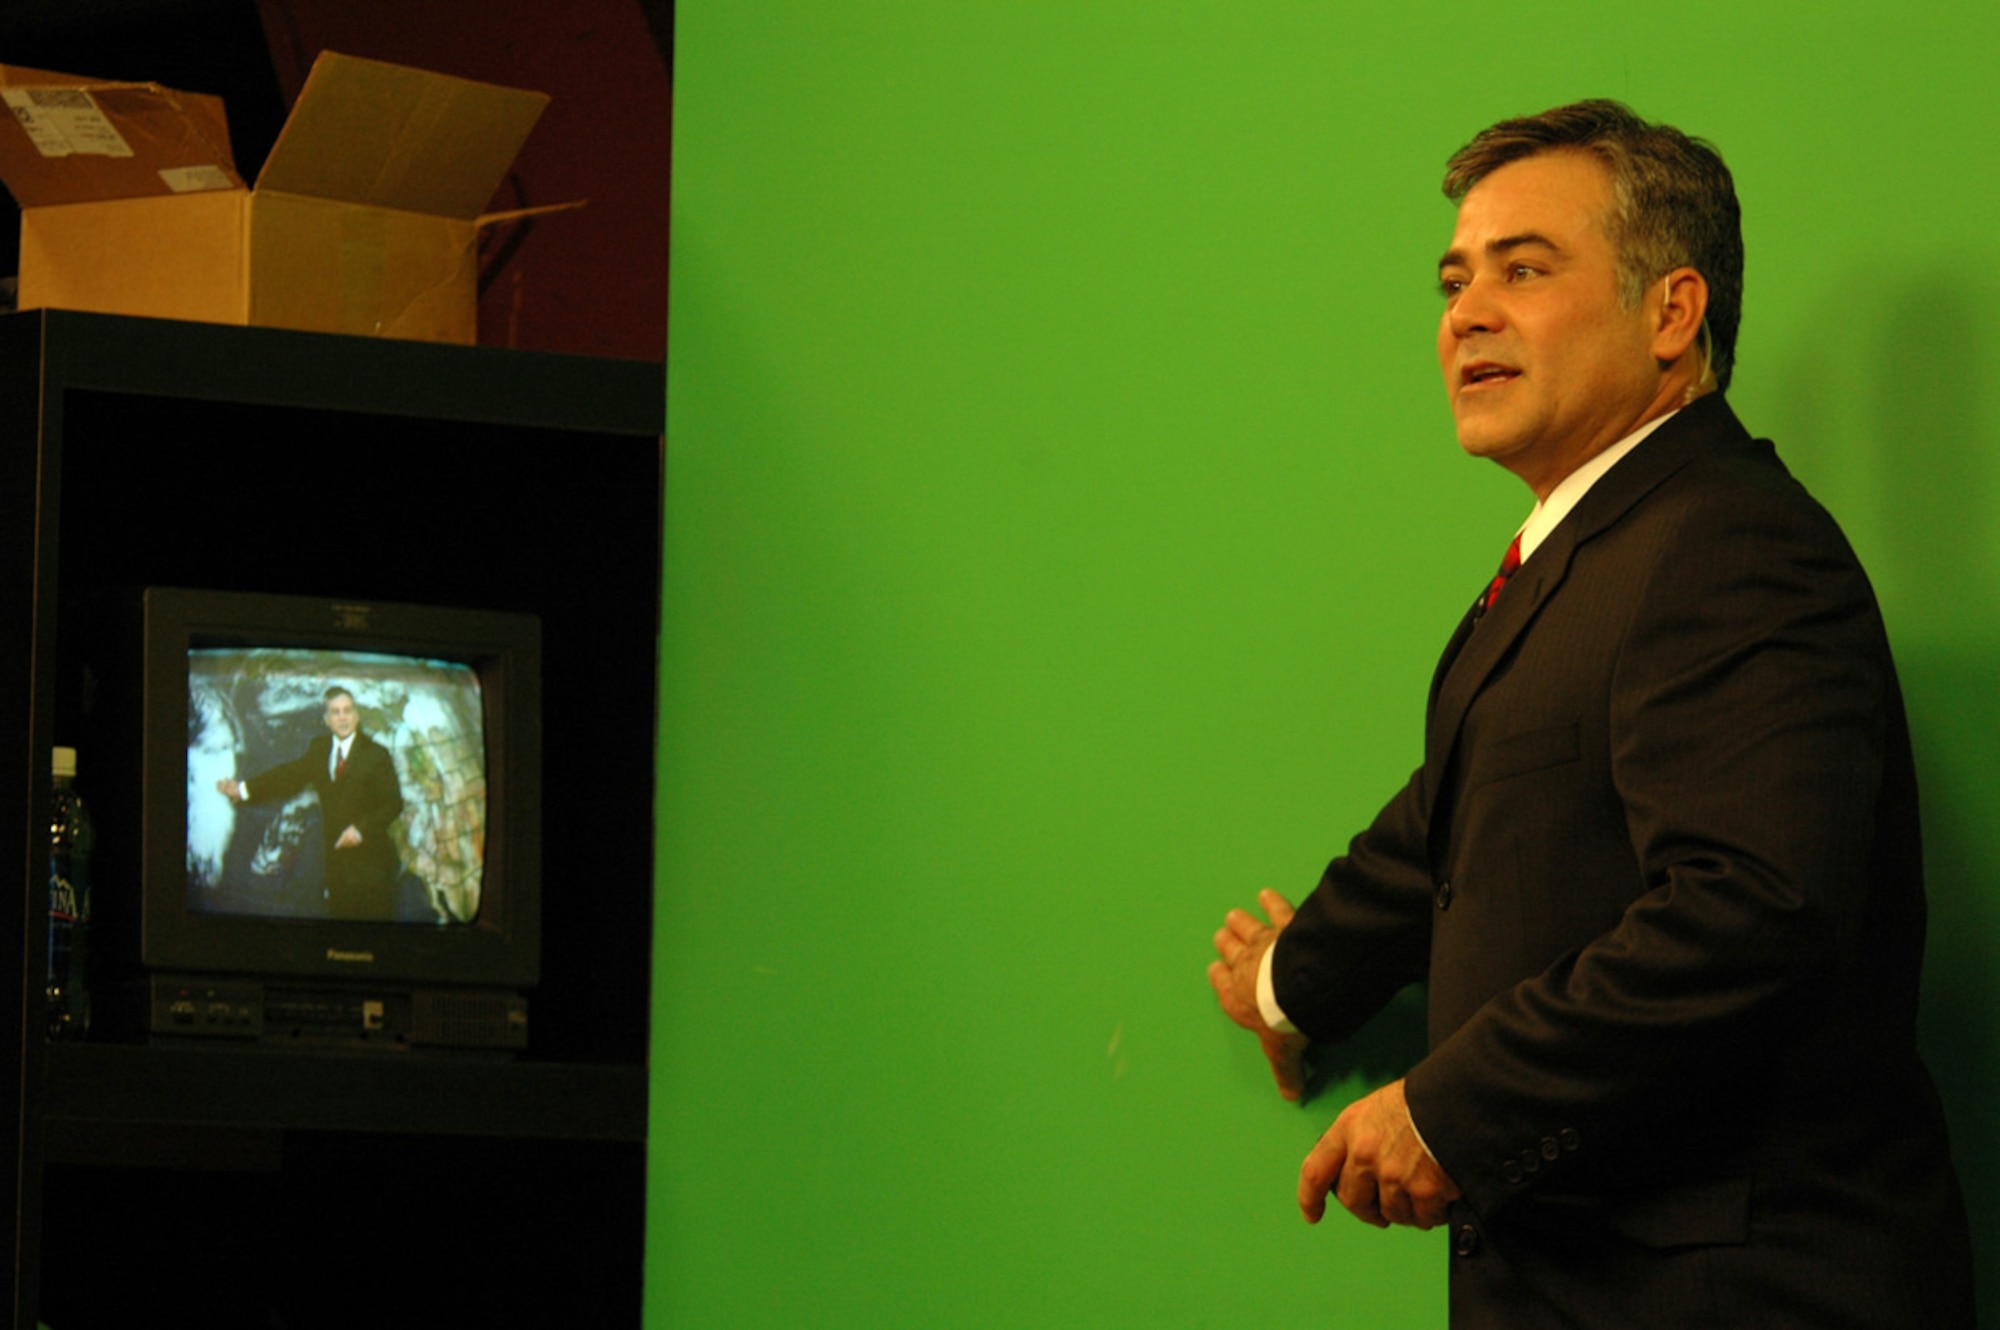 FAIRCHILD AIR FORCE BASE, Wash. (AFPN) -- Retired Master Sgt. Dave Law, broadcast weatherman, KHQ6, uses a green screen to transpose local area weather maps and other weather-related information during a broadcast Jan. 6. He retired from the Air Force in November after serving 23 years as a meteorologist. (U.S. Air Force photo by Staff Sgt. Nathan Gallahan)